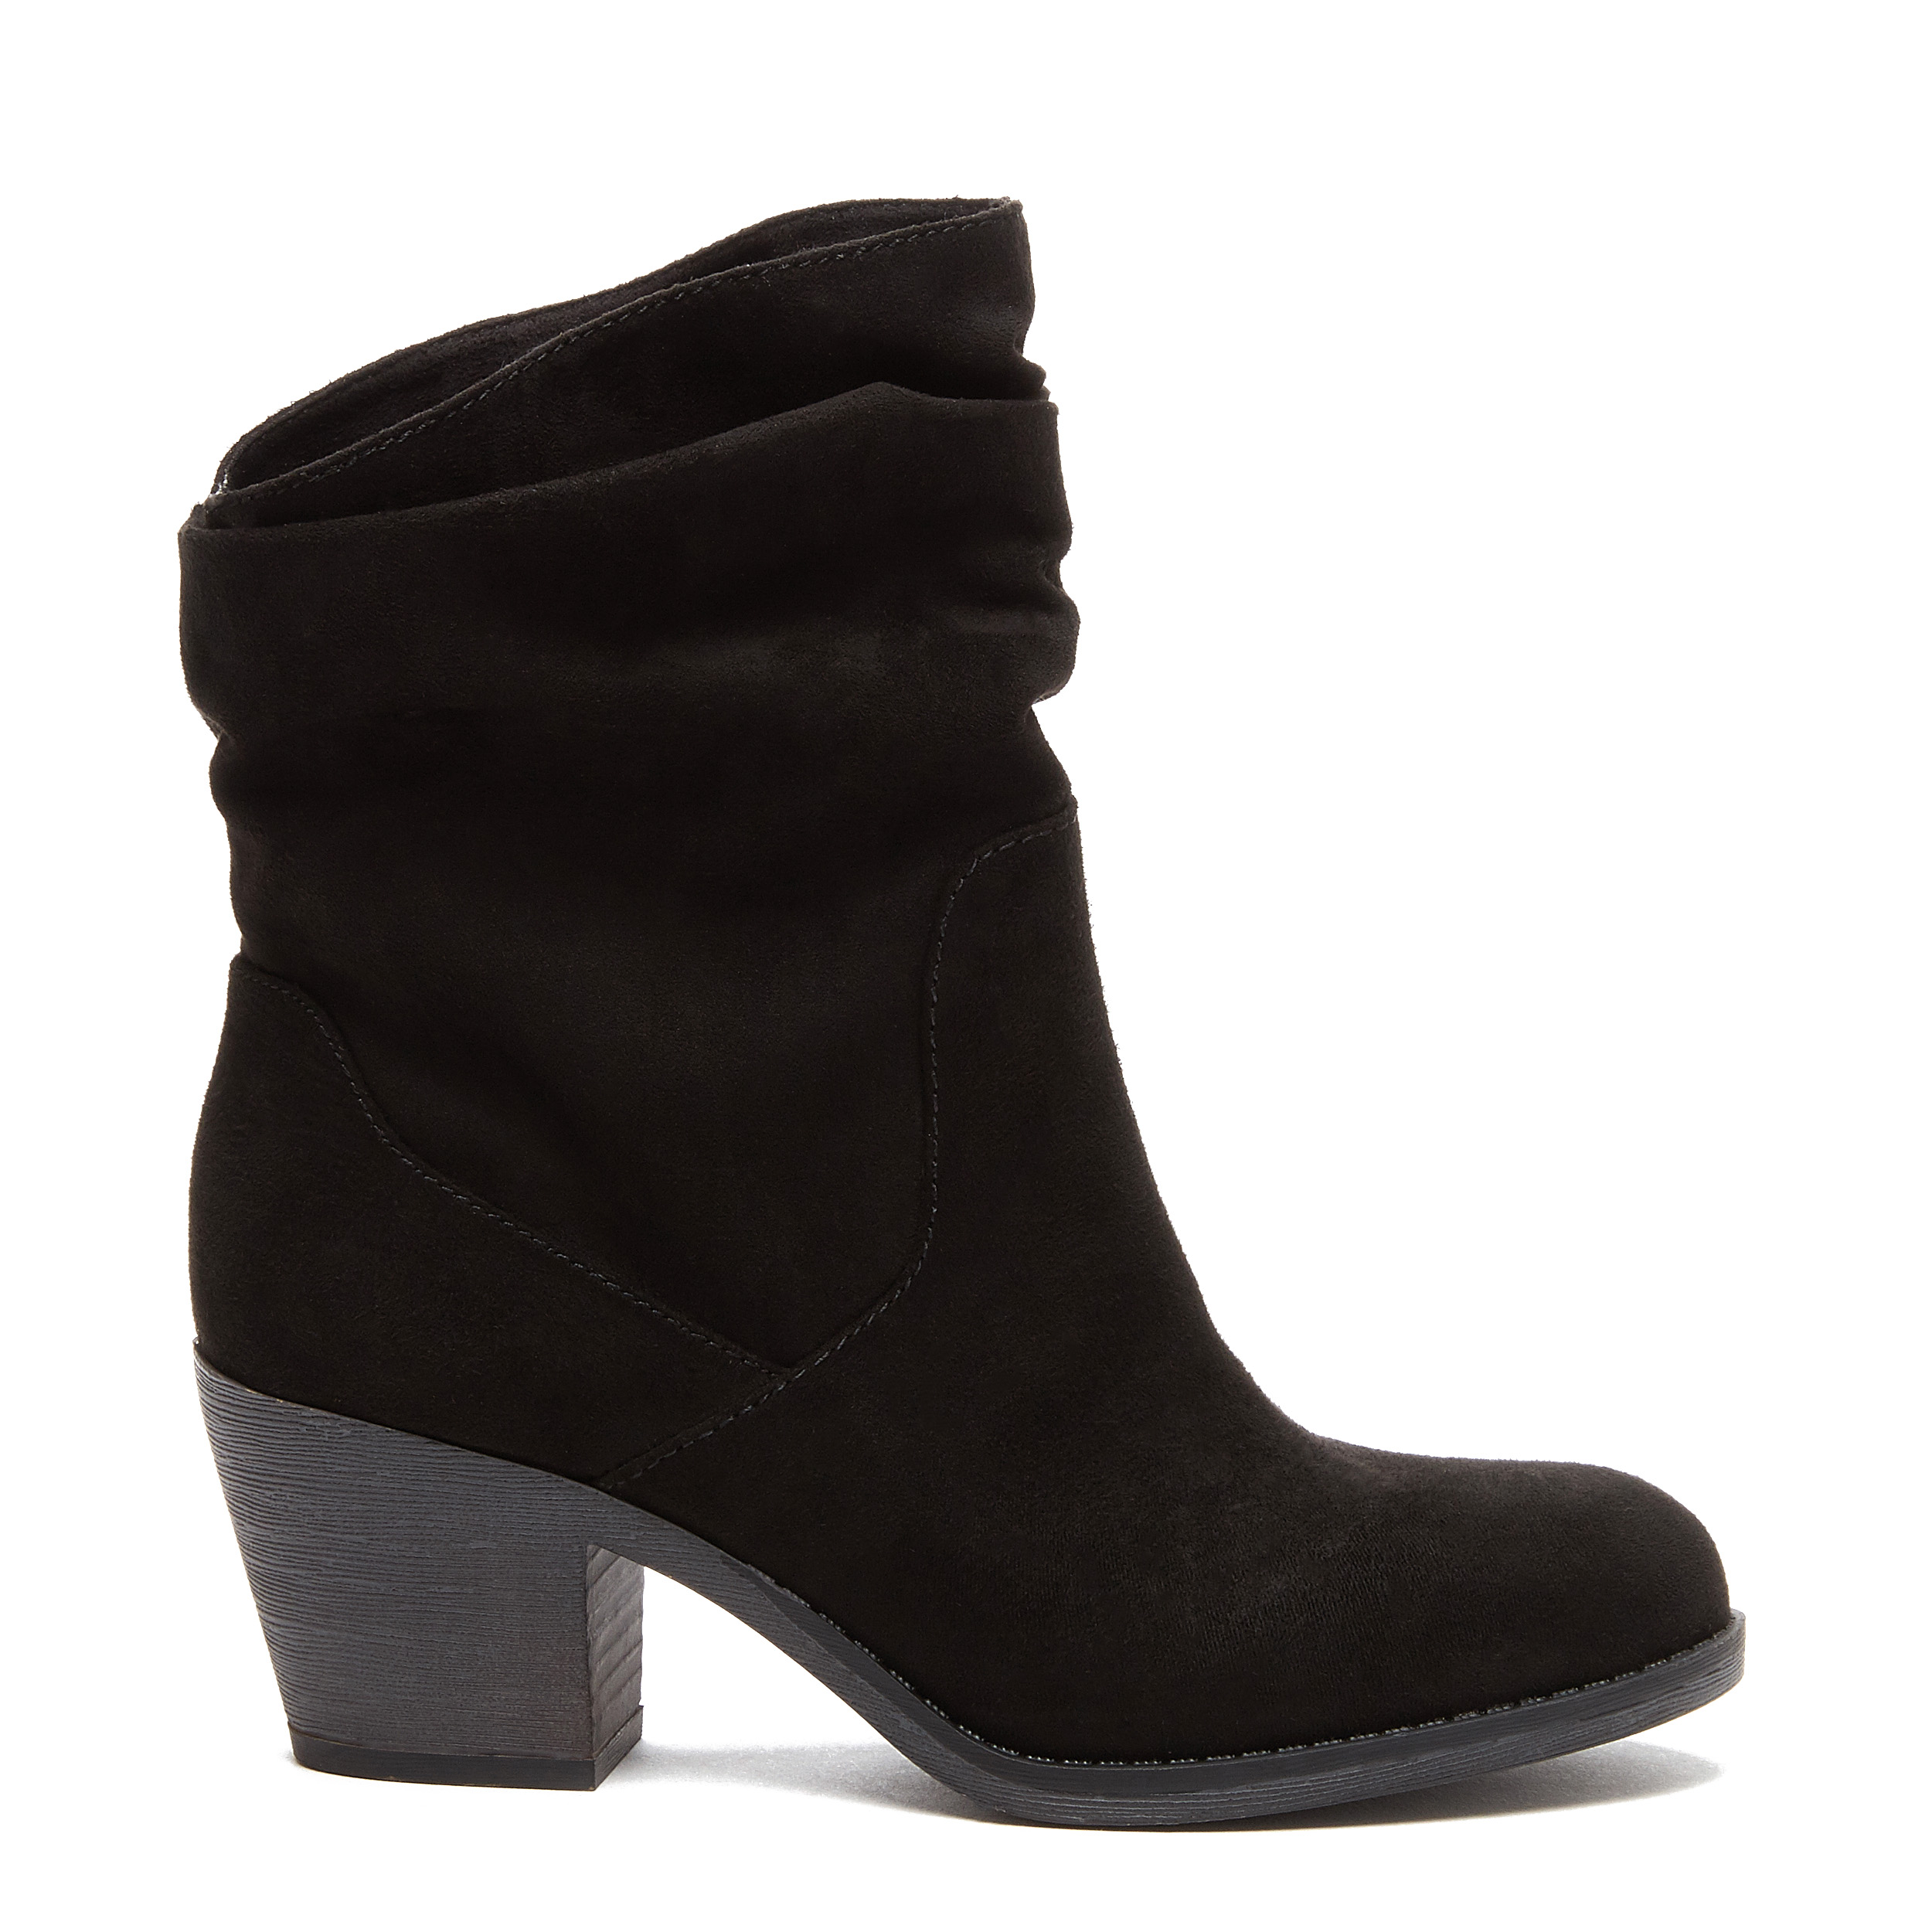 Rocket Dog Sassily Slouch Heeled Boot (Women's) - image 2 of 2